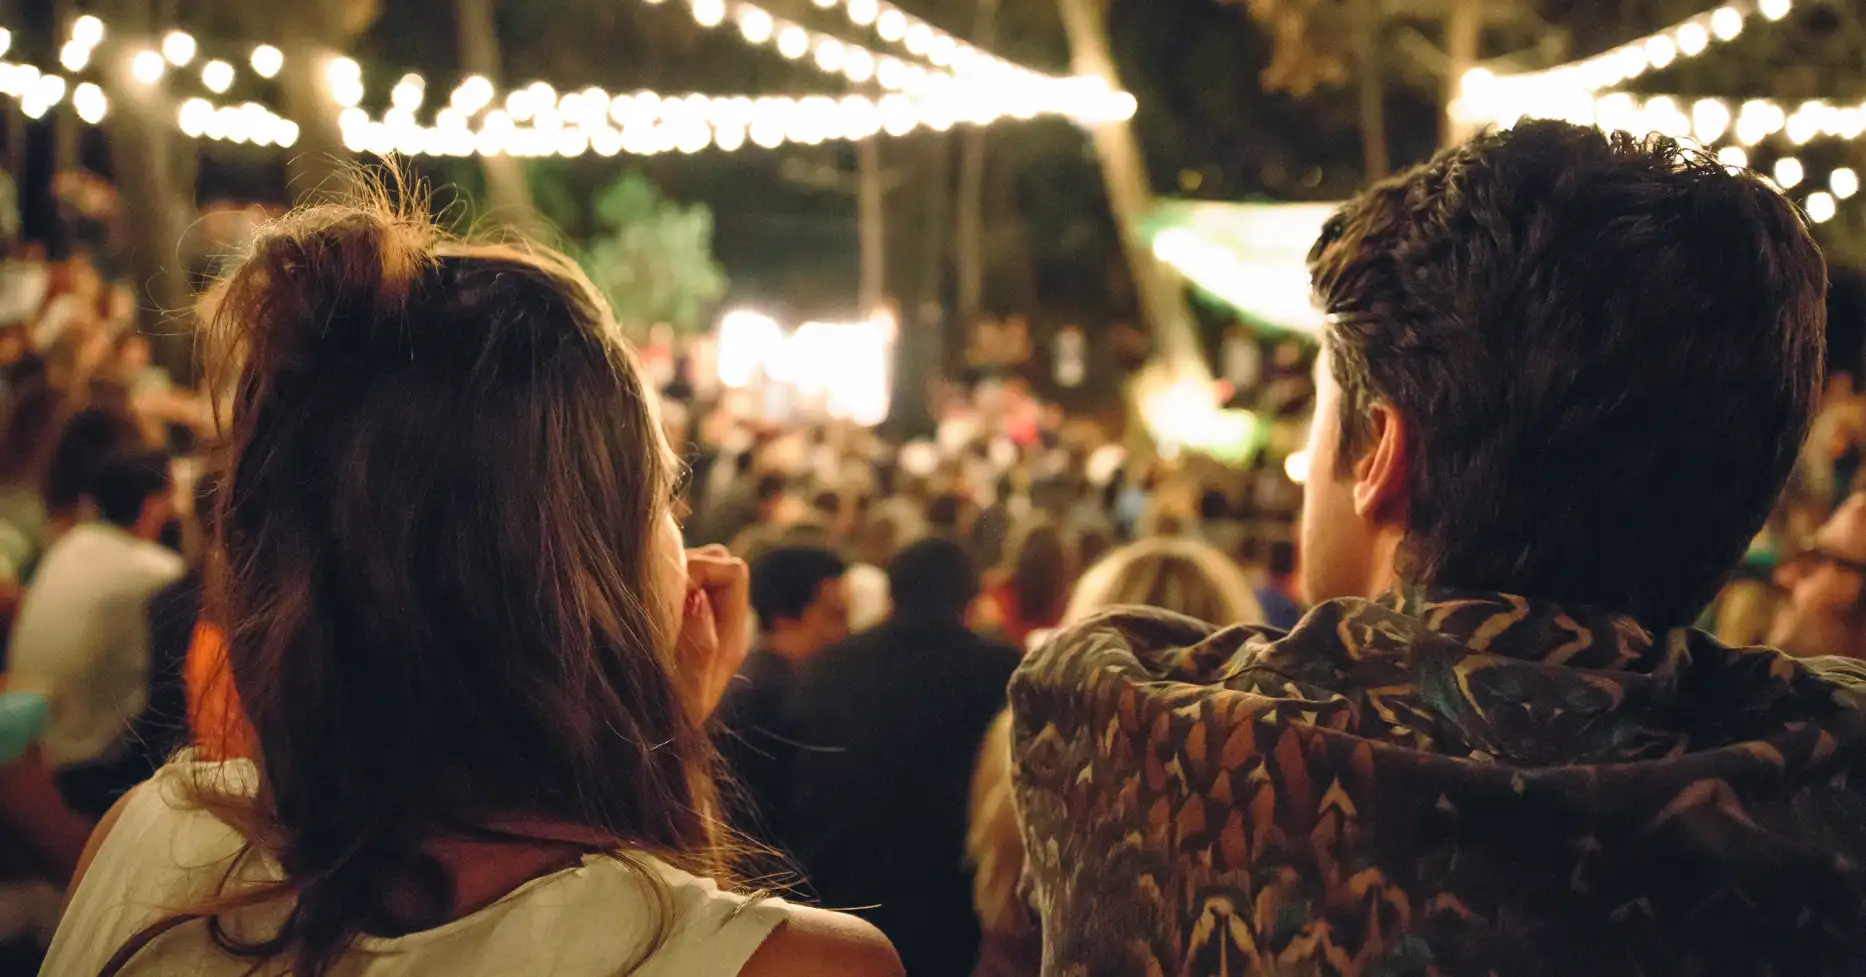 Couple enjoying outdoor event at night